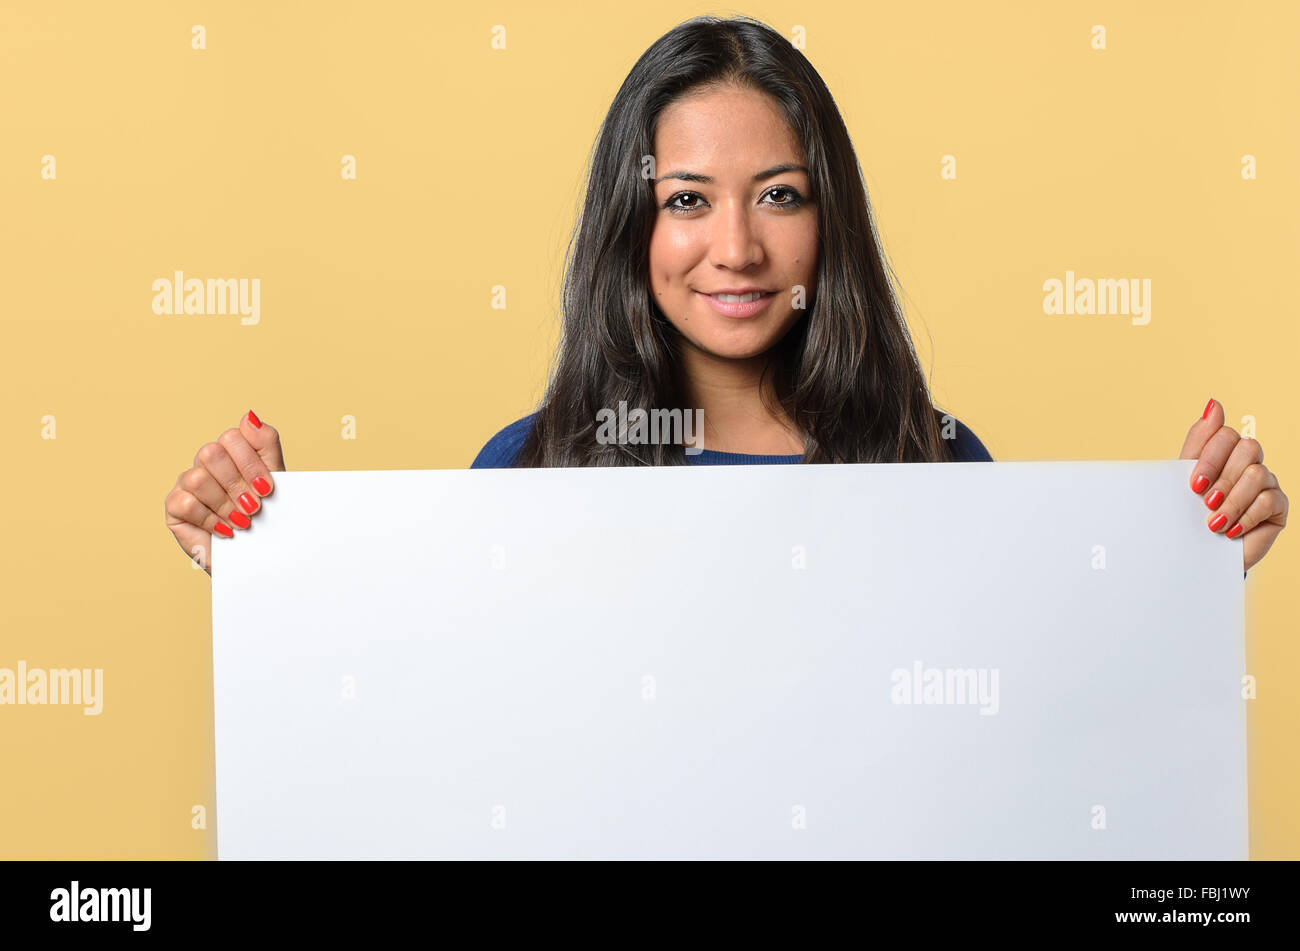 Smiling attractive young woman holding a blank white sign with copy space for your text that she is holding in front of her ches Stock Photo